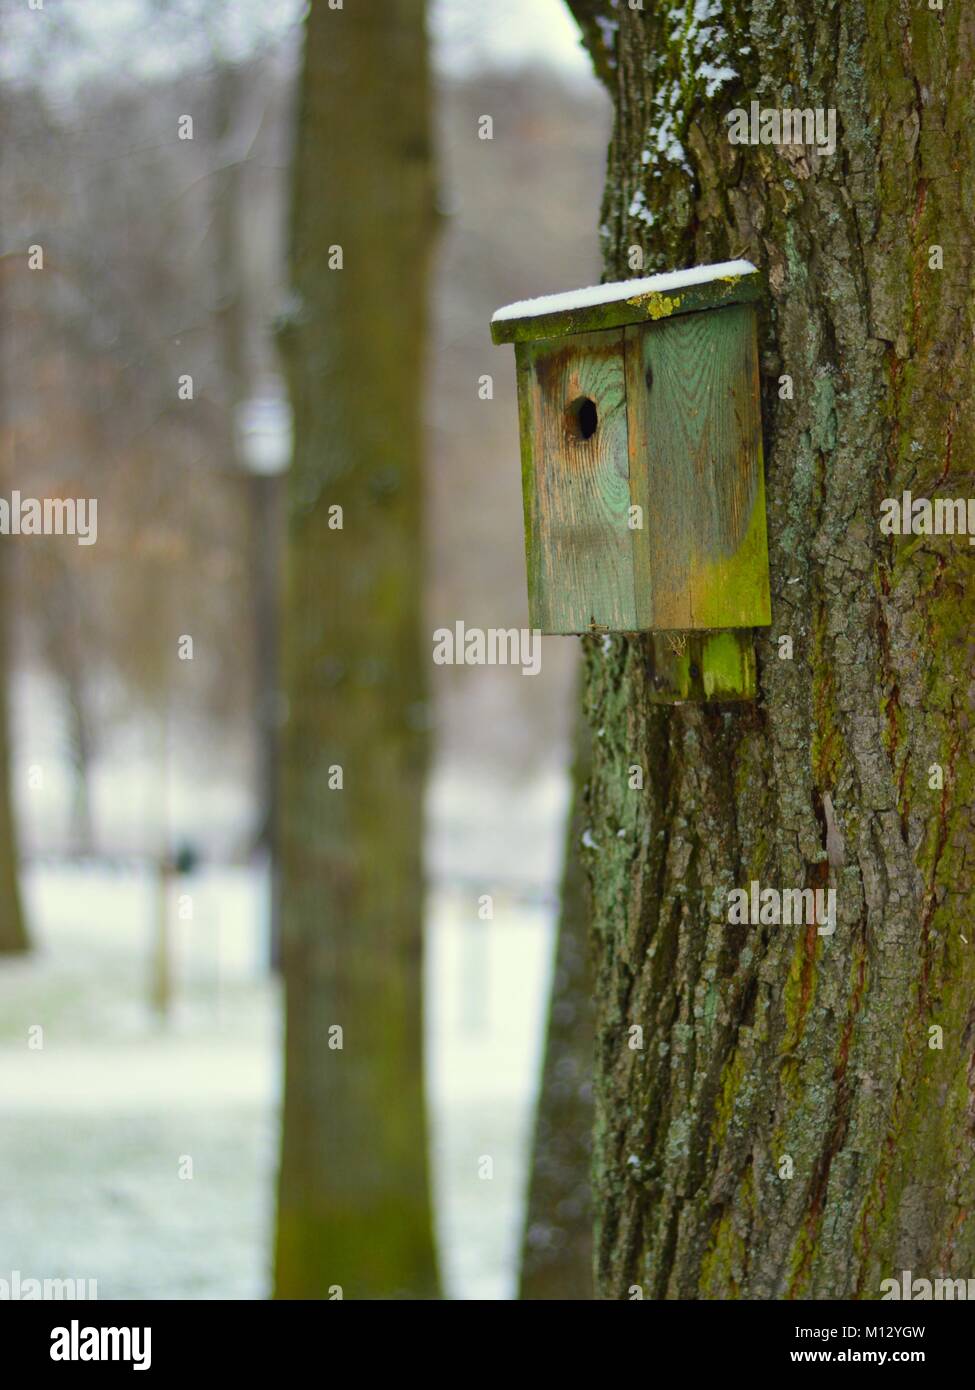 A nesting box in a tree Stock Photo